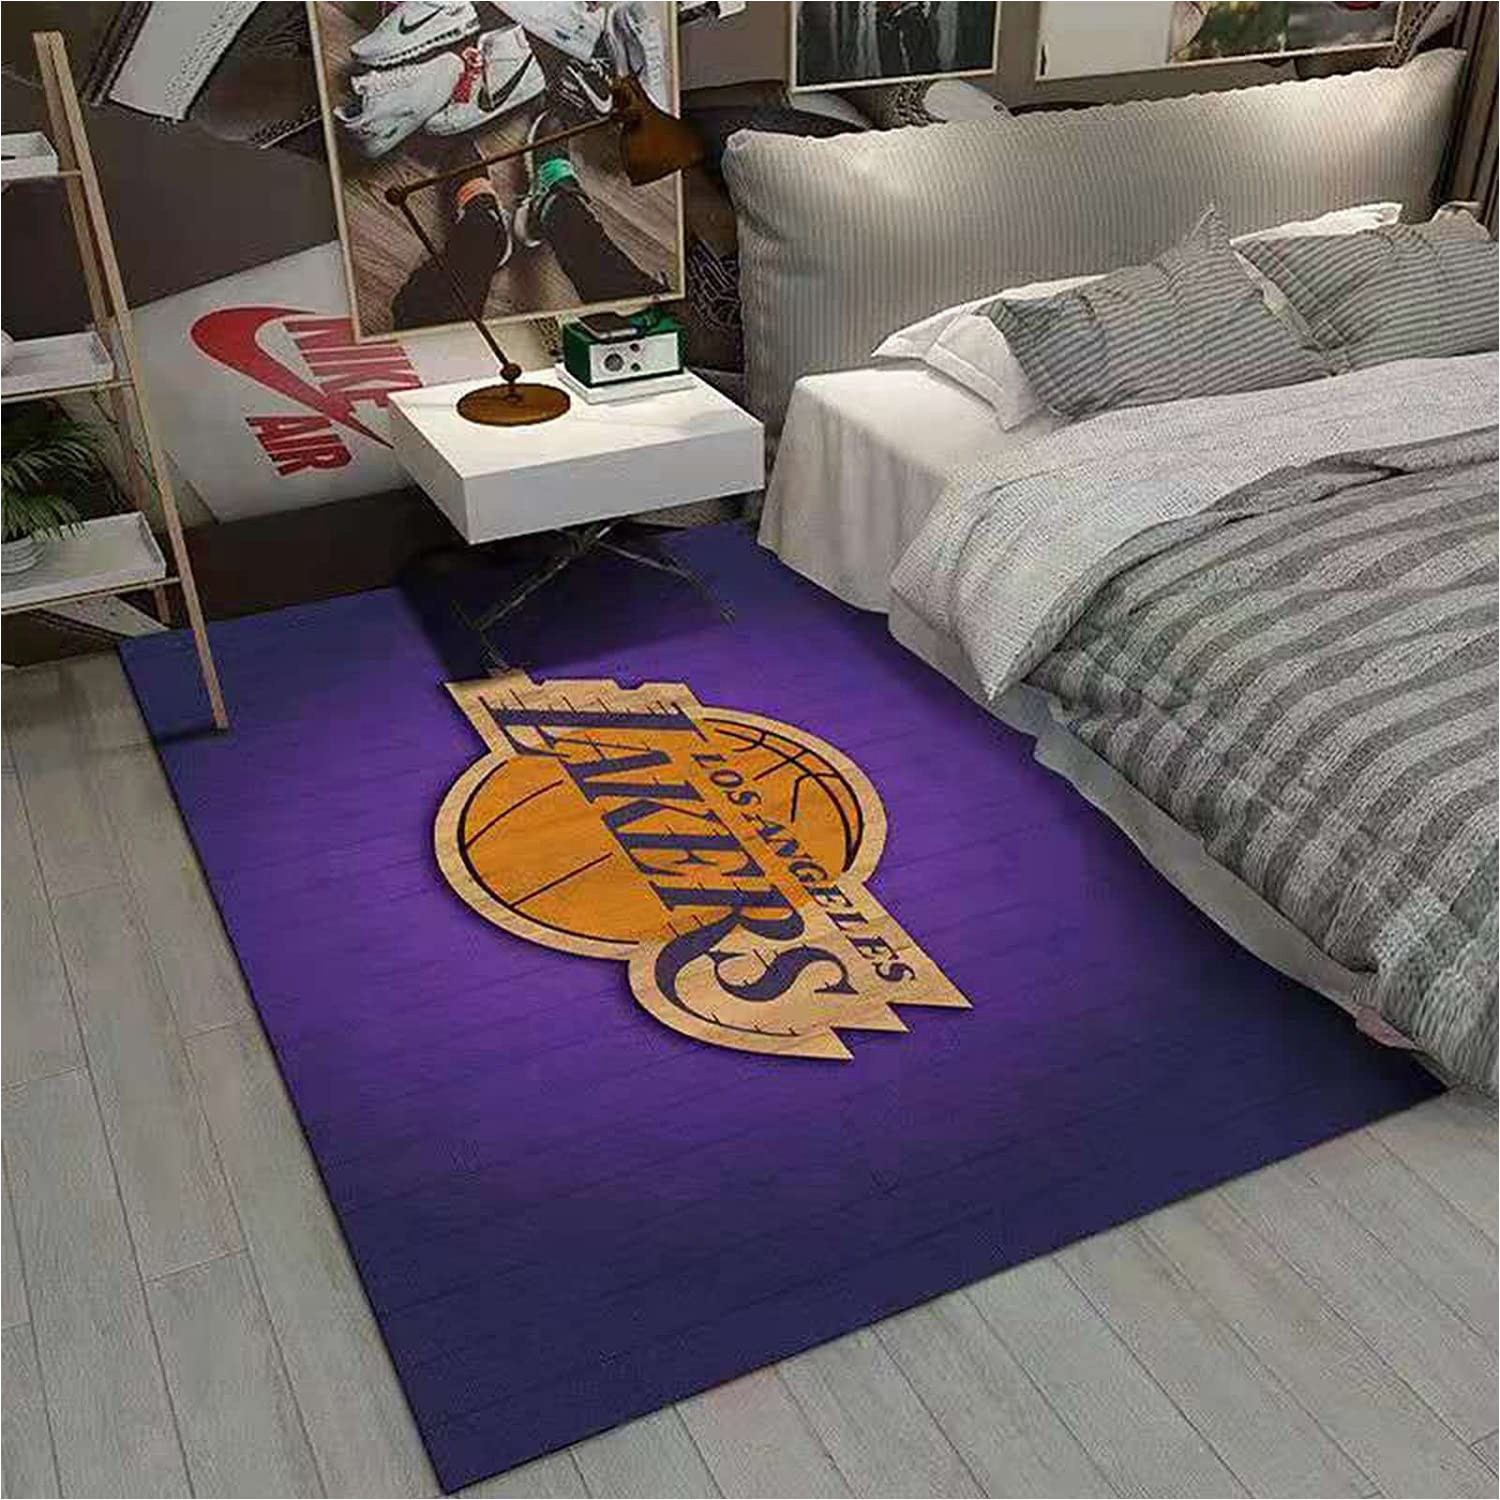 Cheap area Rugs Los Angeles area Rugs, 3d Basketball Rug, Bedroom Rug, soft Floor Mat, Non …